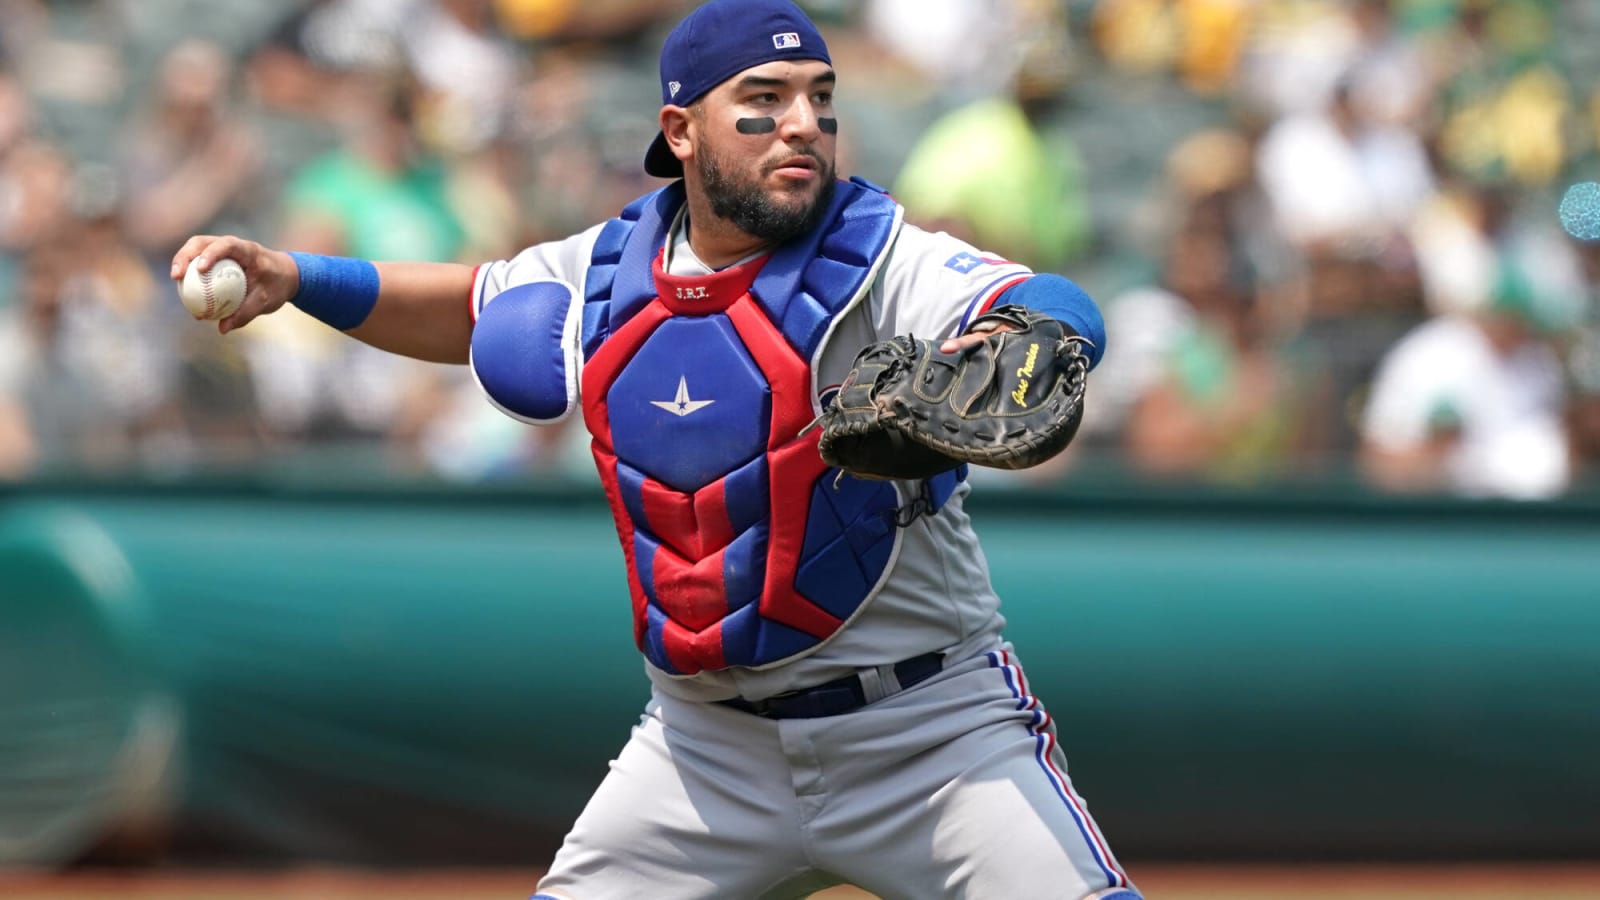 Yankees acquire catcher Jose Trevino from Rangers